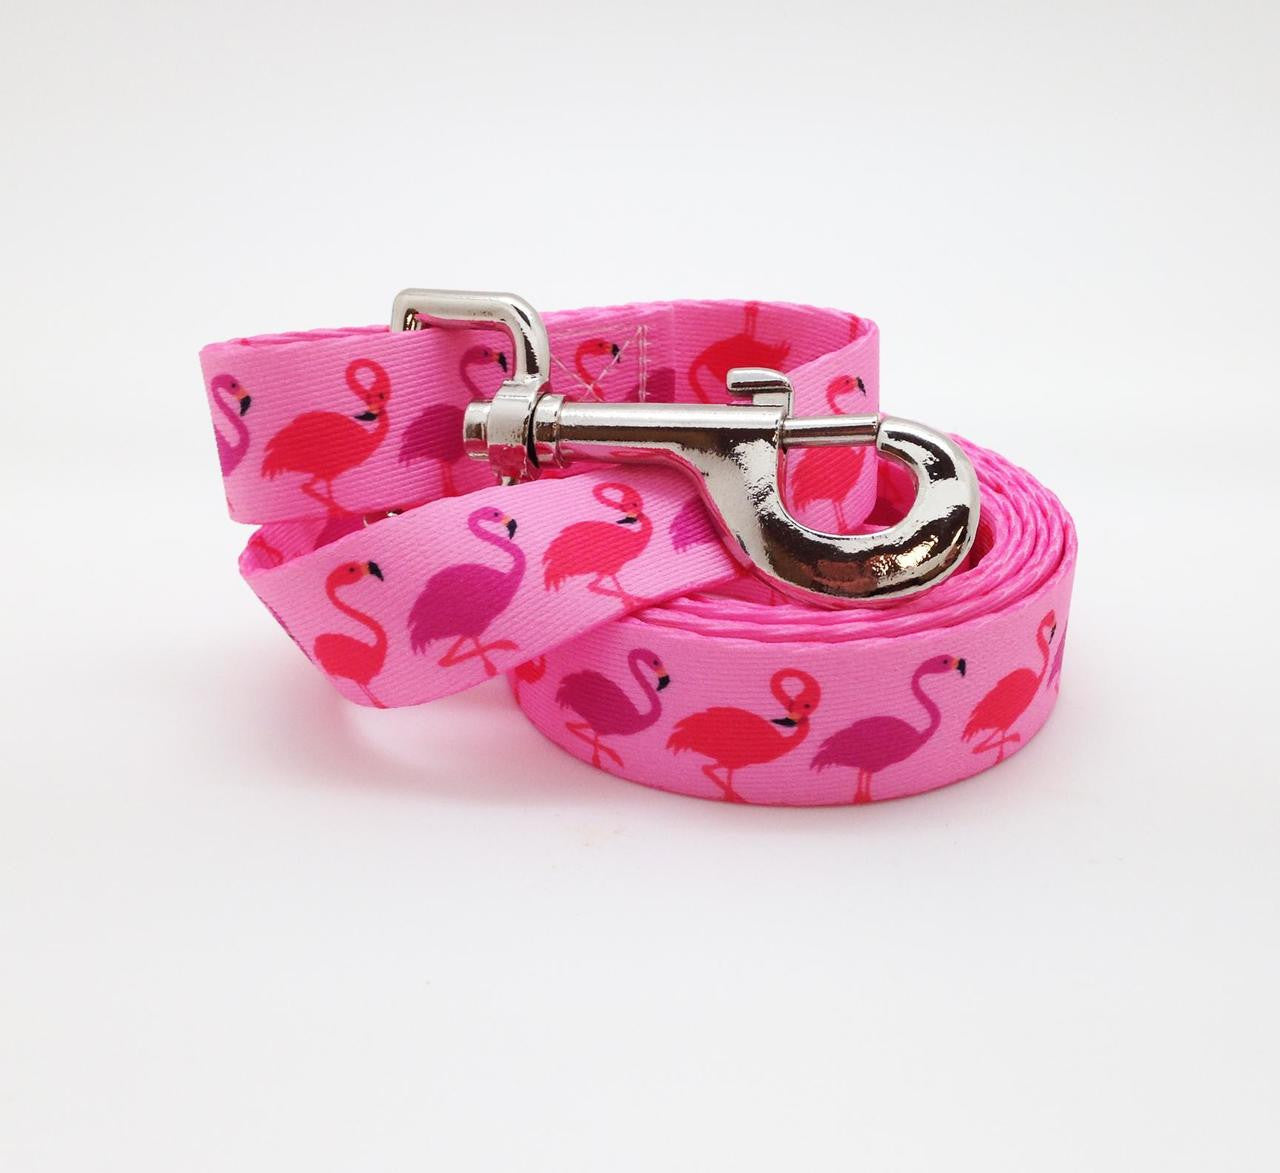 Dog Leash 1" wide with pink and lavender Flamingos on pink webbing